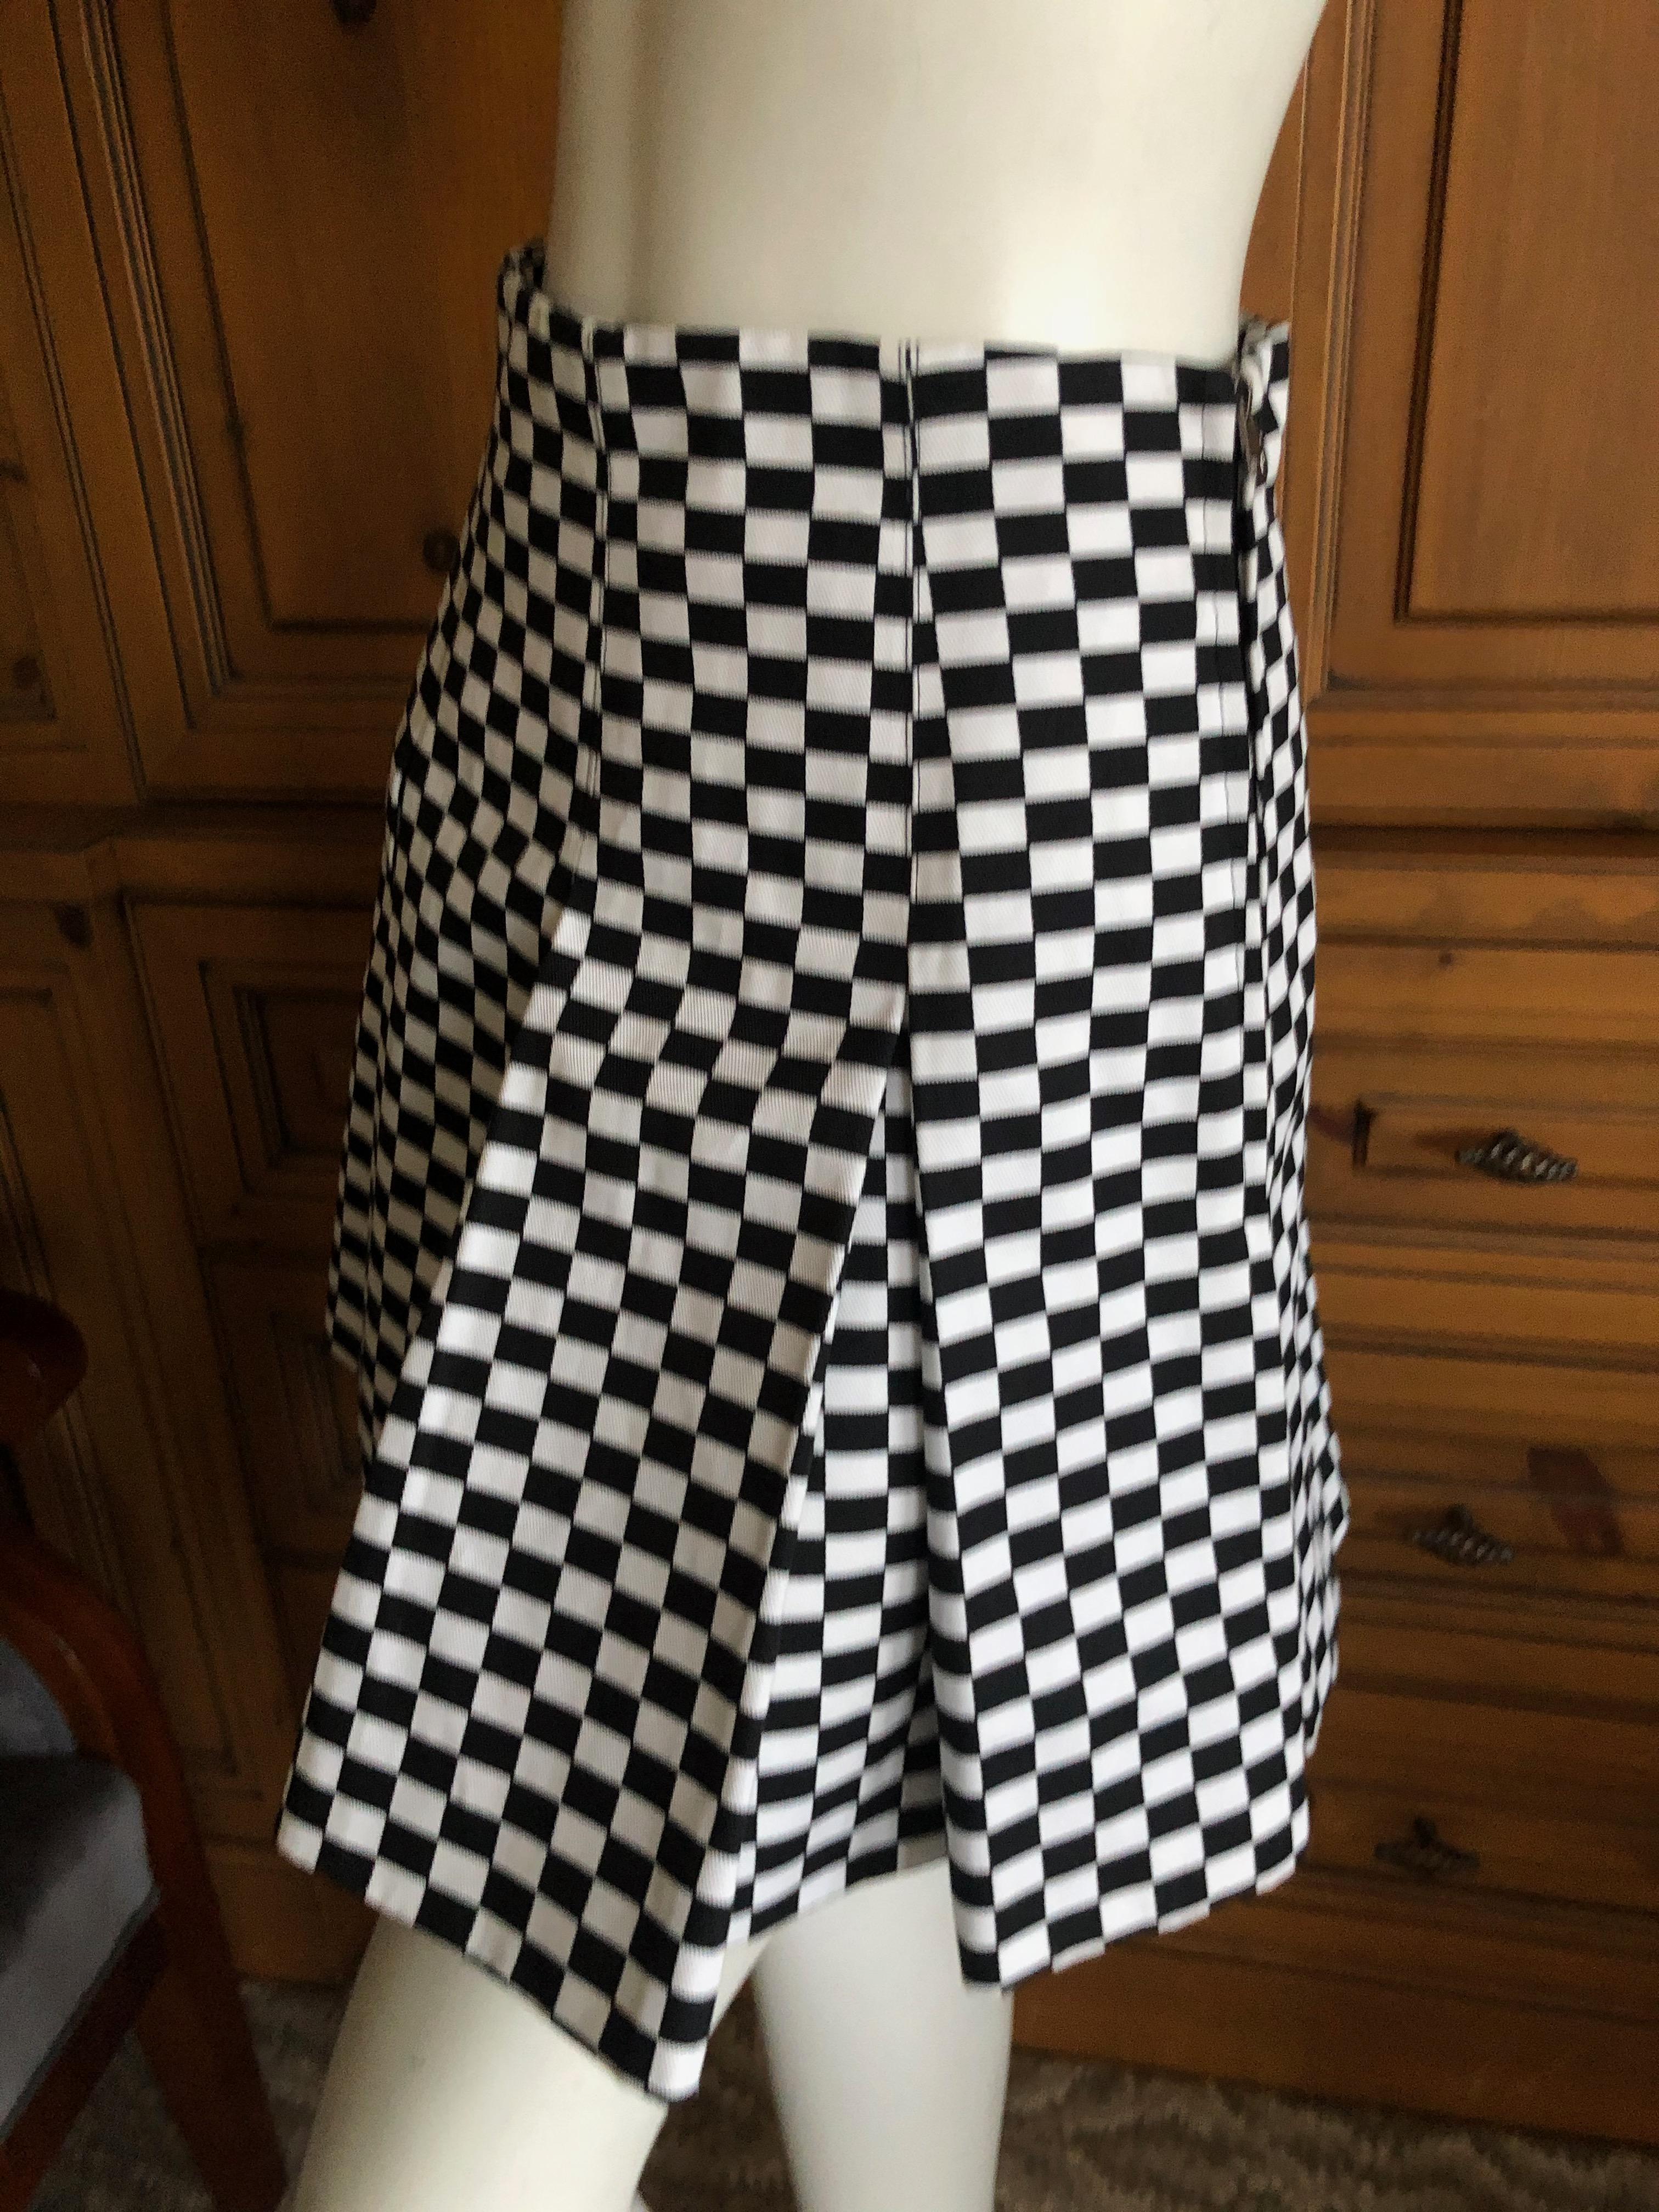 Christian Dior Op Art Black and White Cotton Denim Pleated Skirt In Excellent Condition For Sale In Cloverdale, CA